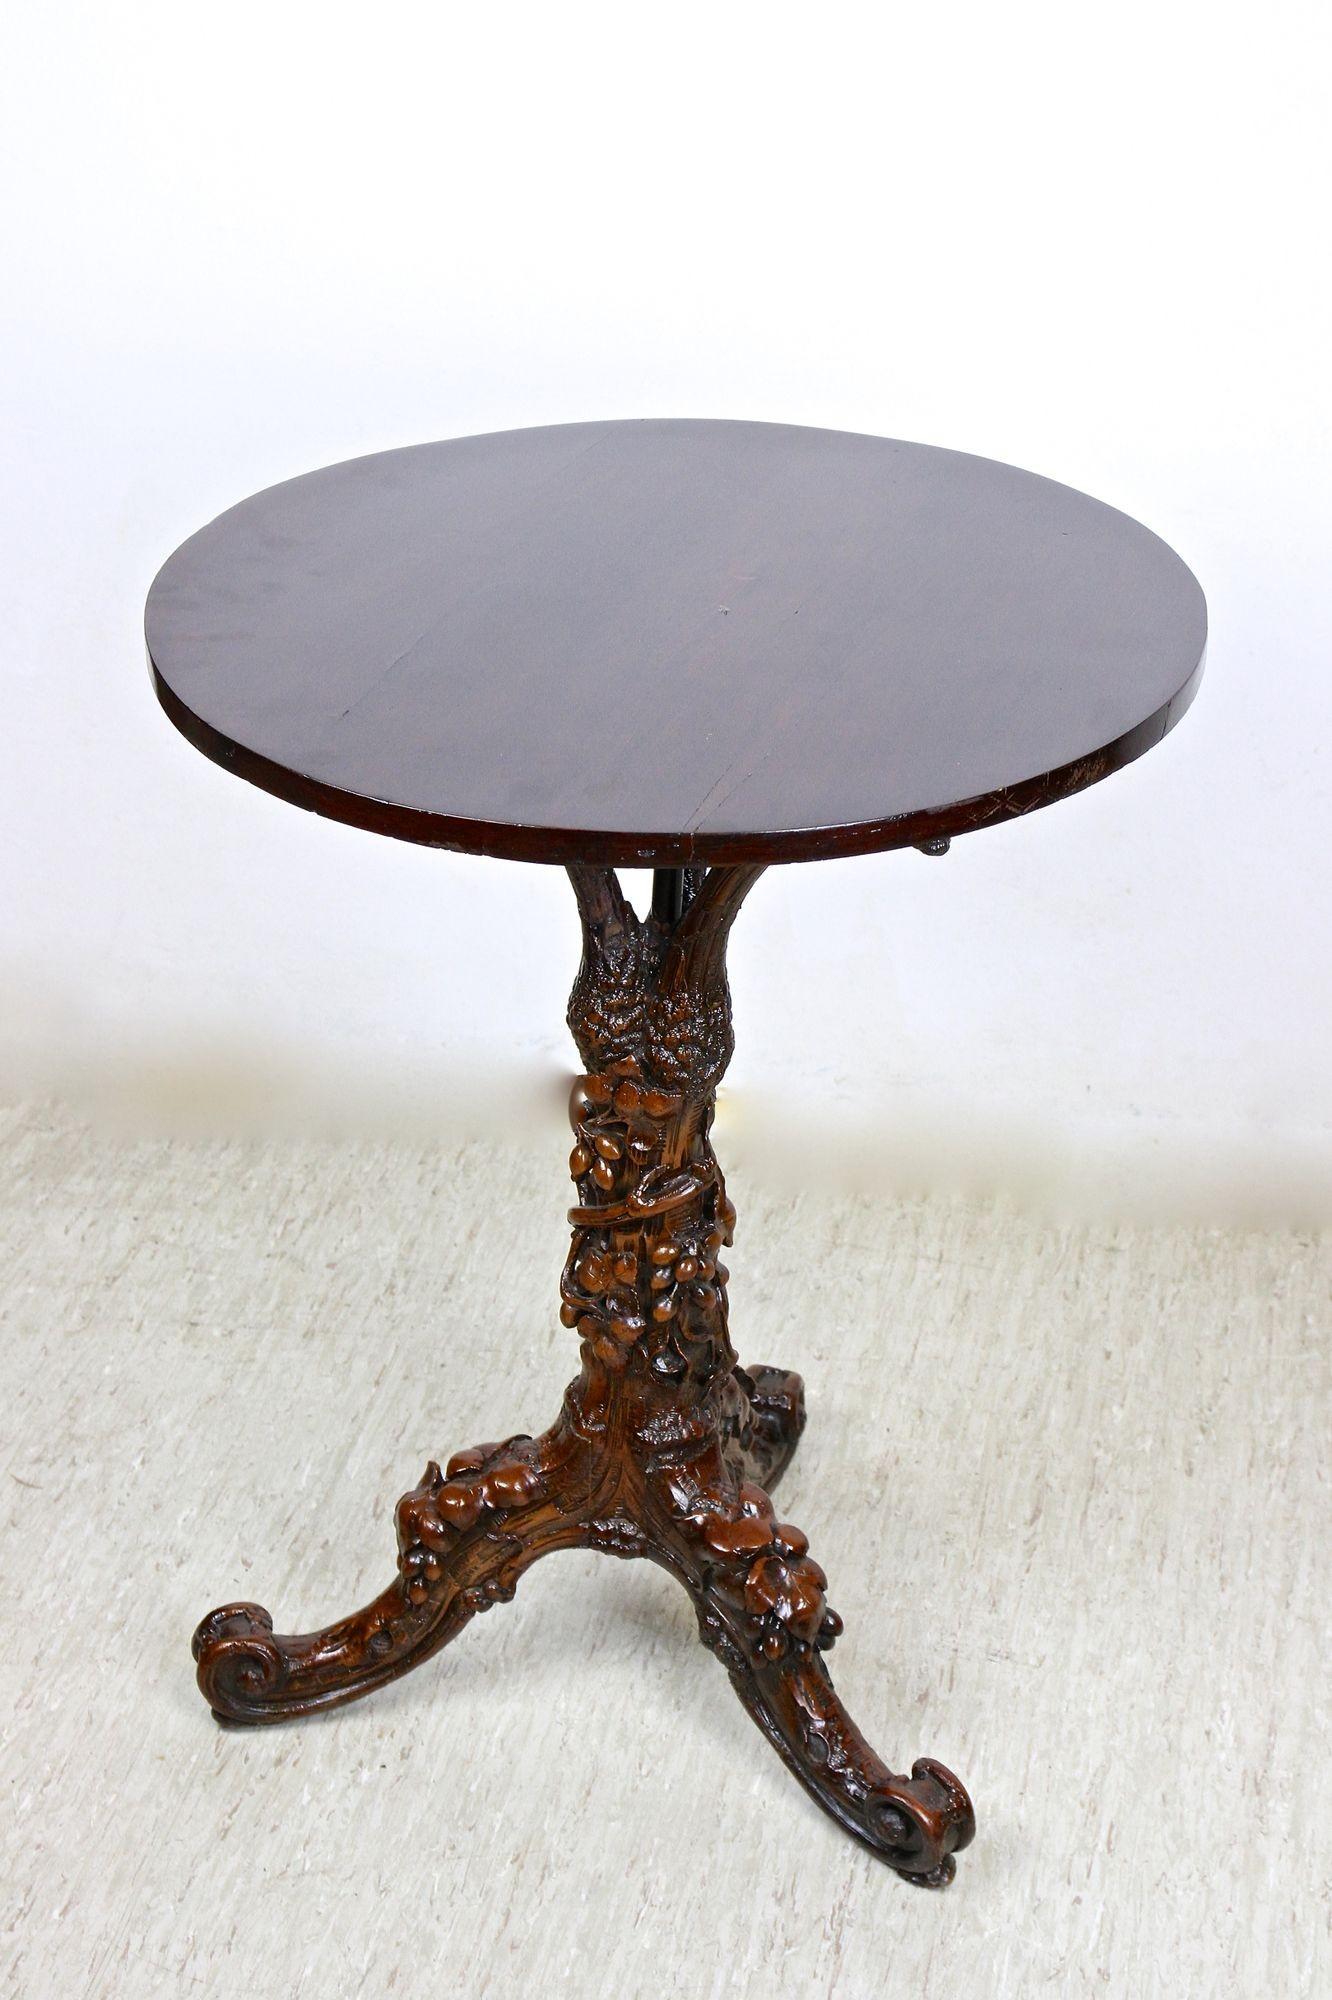 Black Forest Rustic Side Table with Handcarved Vine Theme, Austria, ca. 1880 For Sale 8